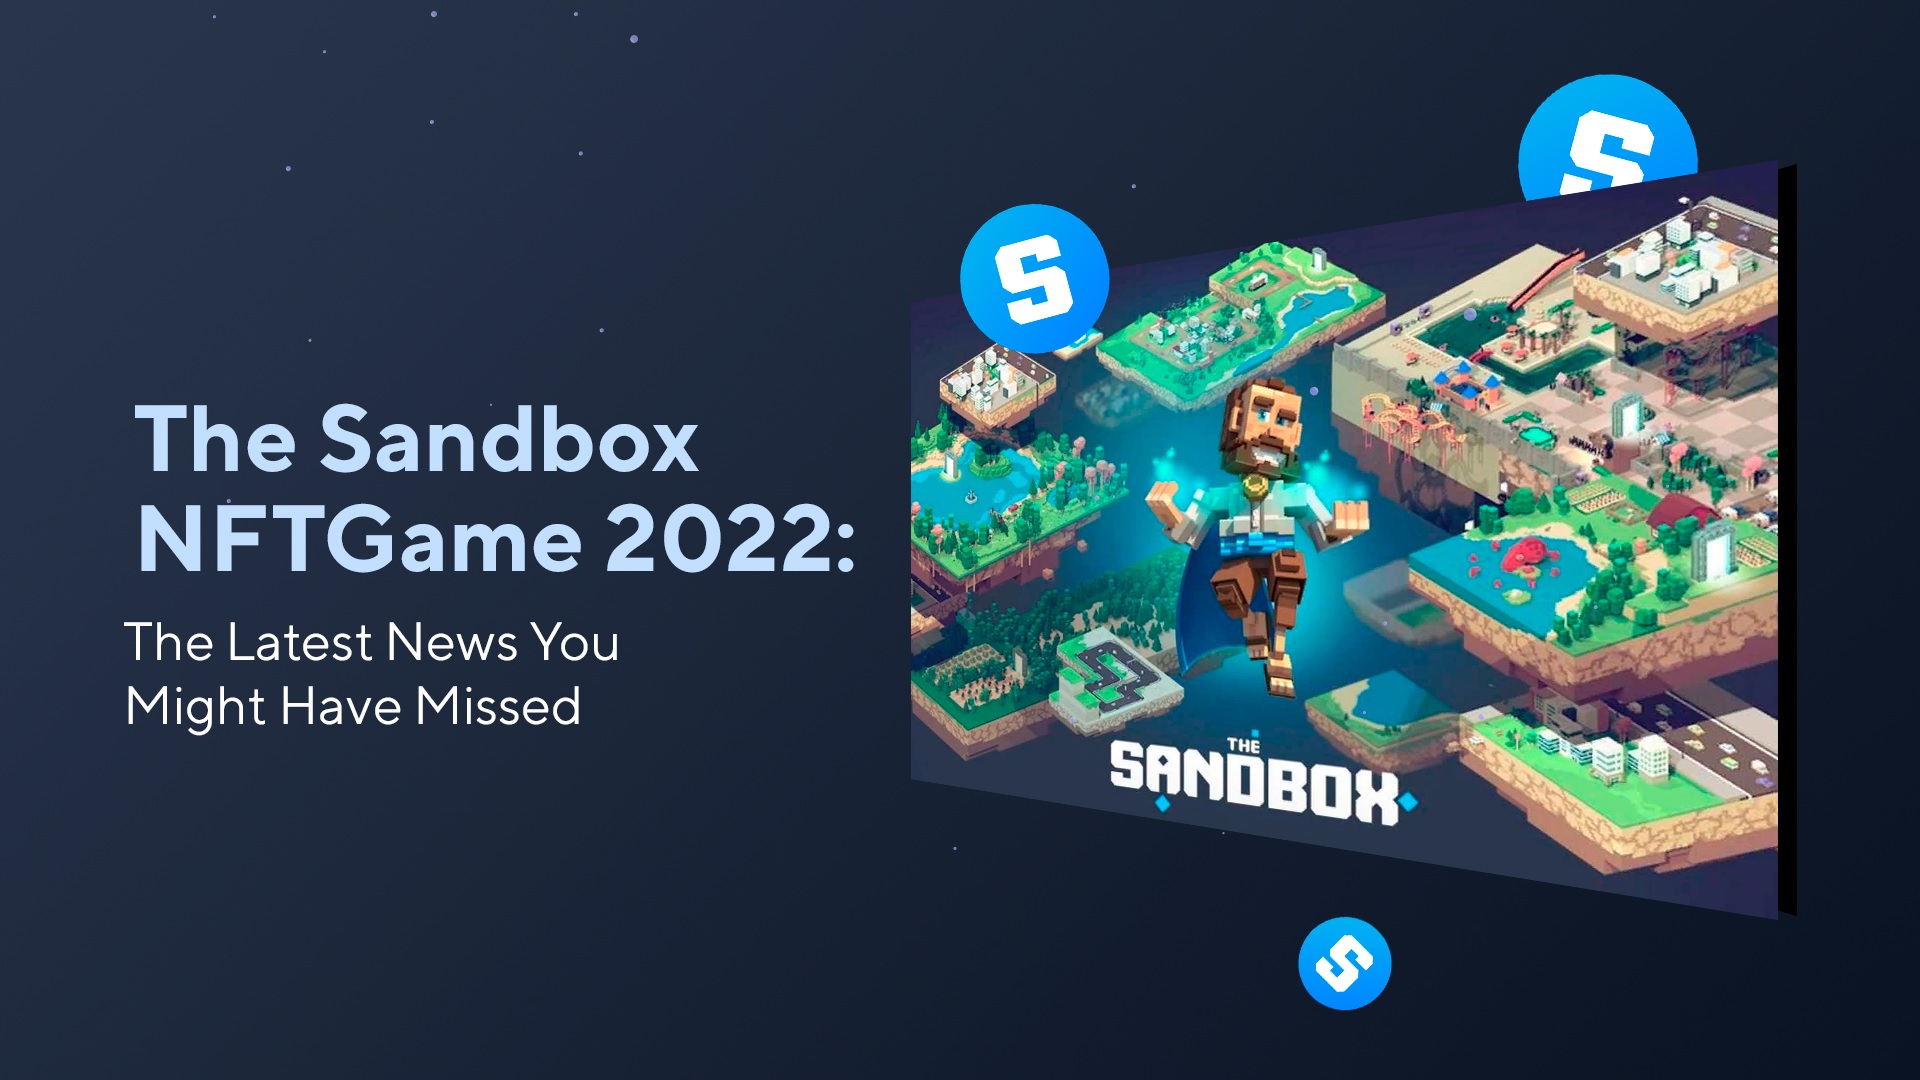 The Sandbox NFT Game 2022: The Latest News You Might Have Missed